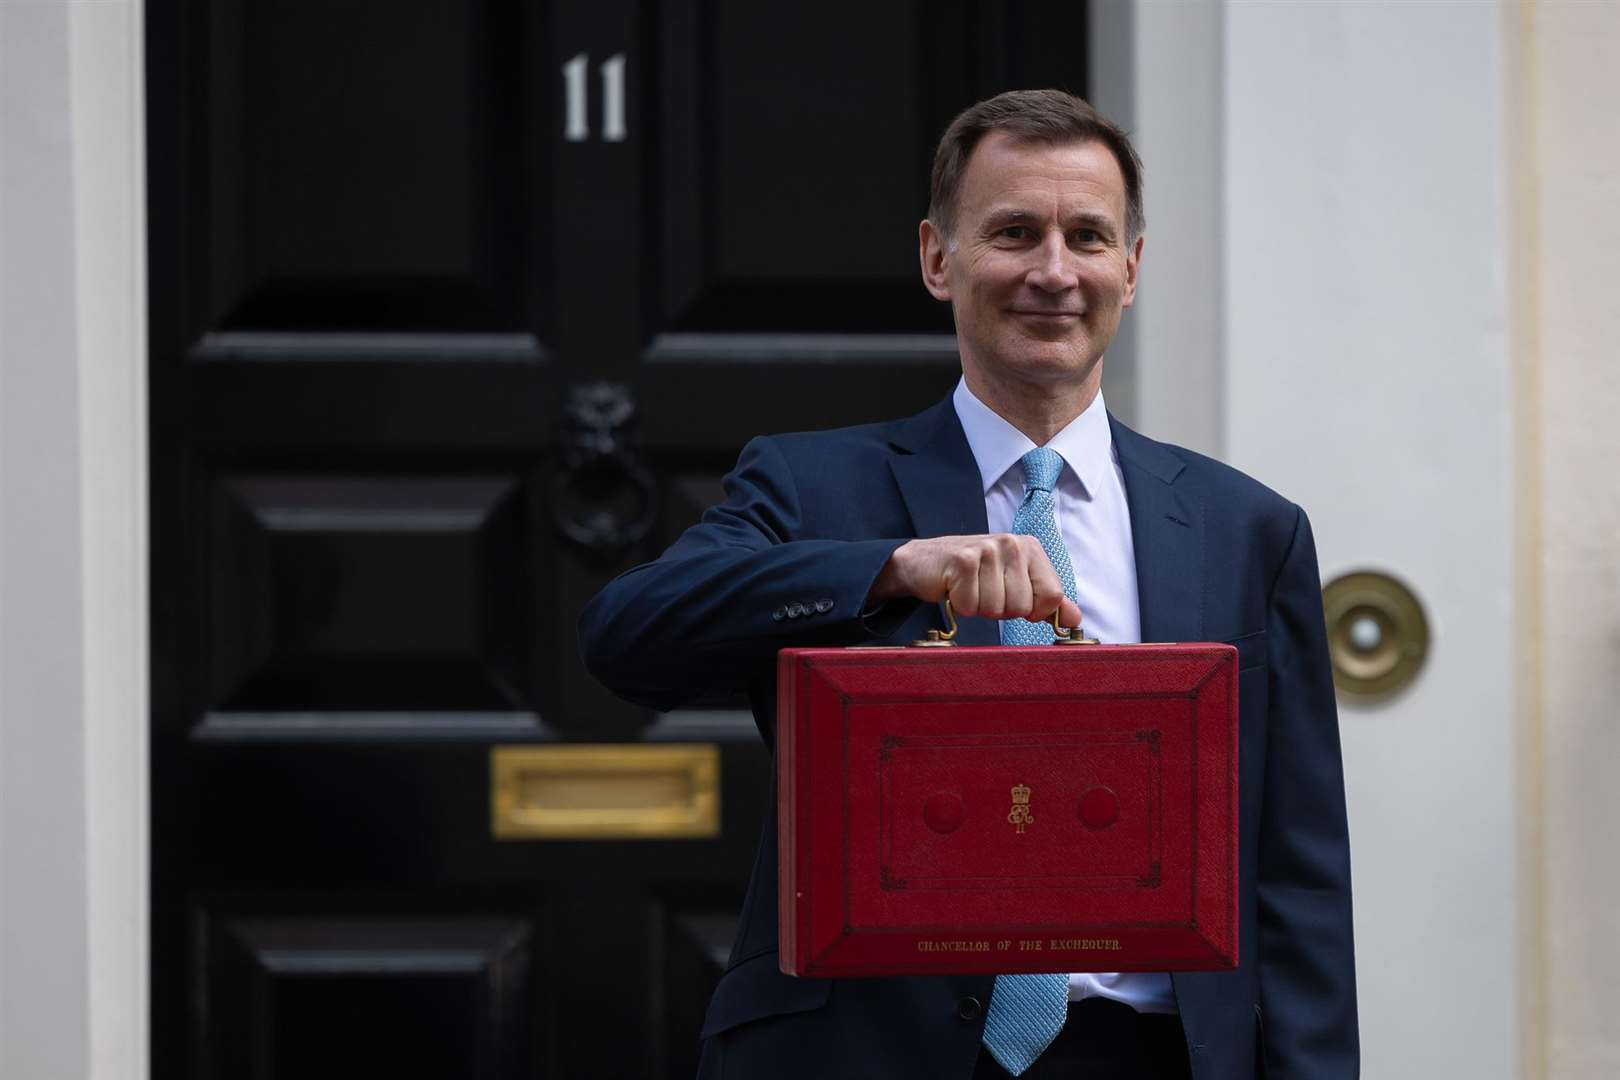 The Chancellor of the Exchequer Jeremy Hunt outside 11 Downing Street with the Red Box alongside the Treasury ministers Picture by Simon Walker No 10 Downing St